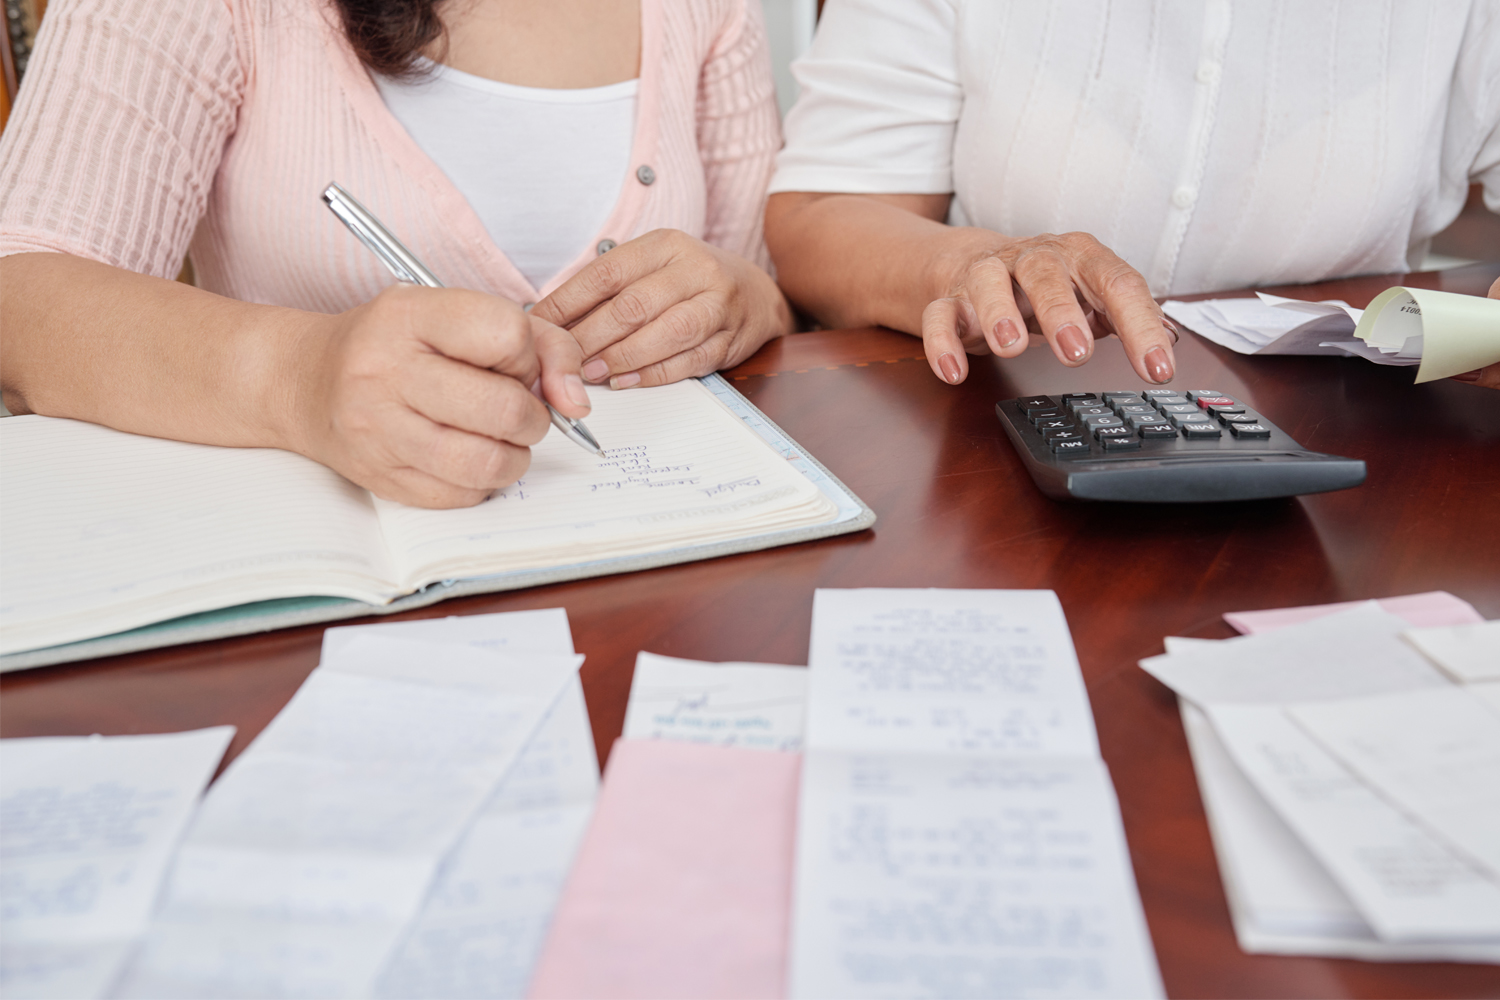 couple calculating on table with receipts all over